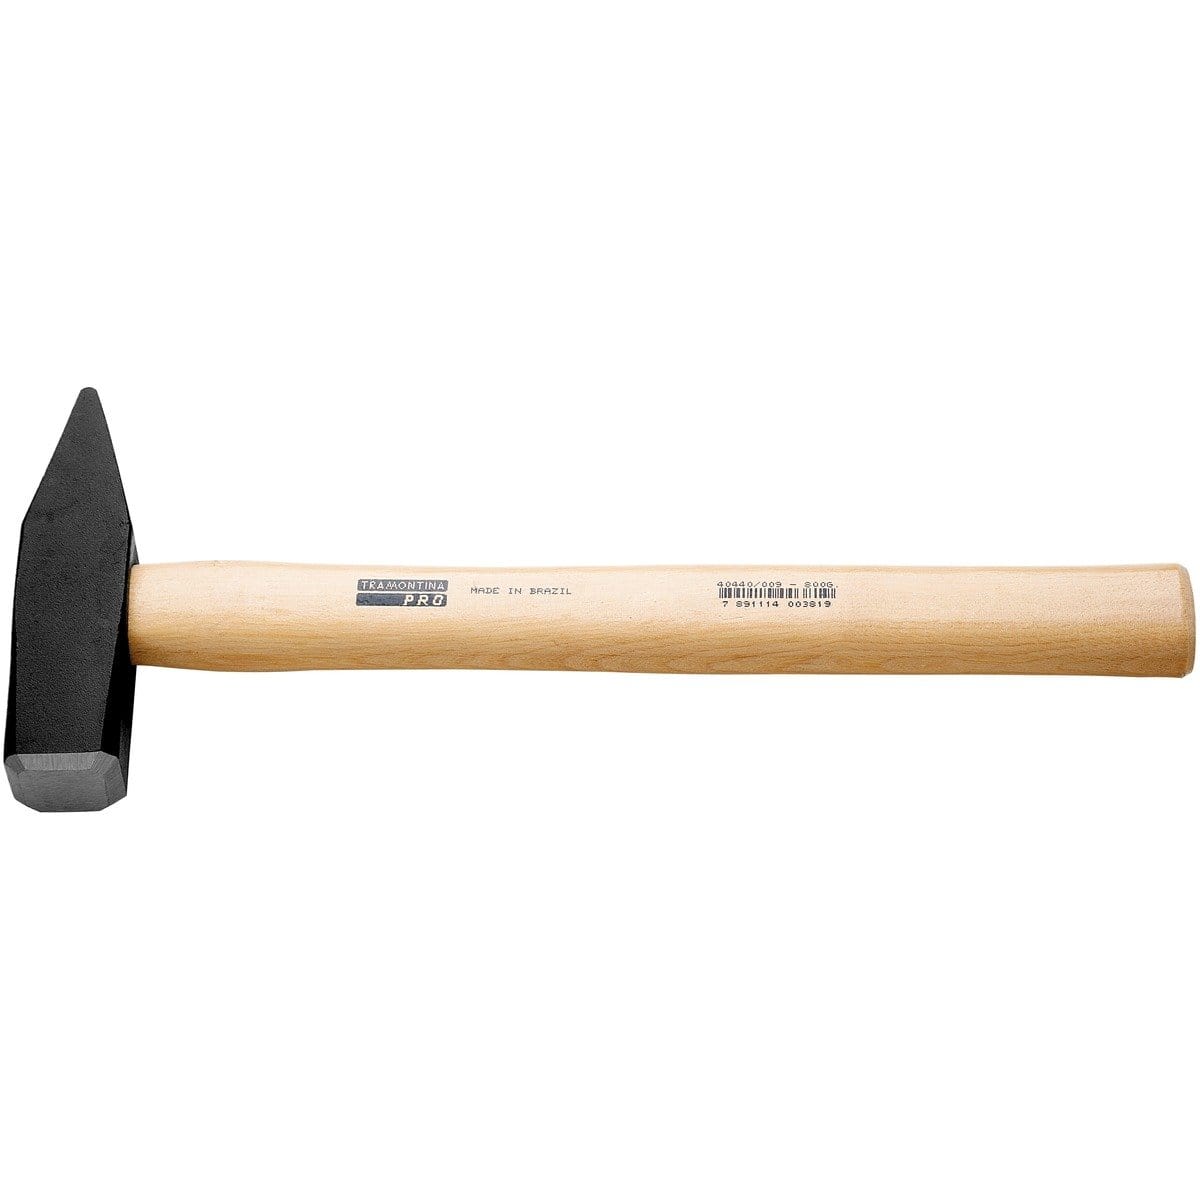 Tramontina 200g Hardwood Handle Machinist's Hammer | Supply Master | Accra, Ghana Hammers Mallets & Sledges Buy Tools hardware Building materials